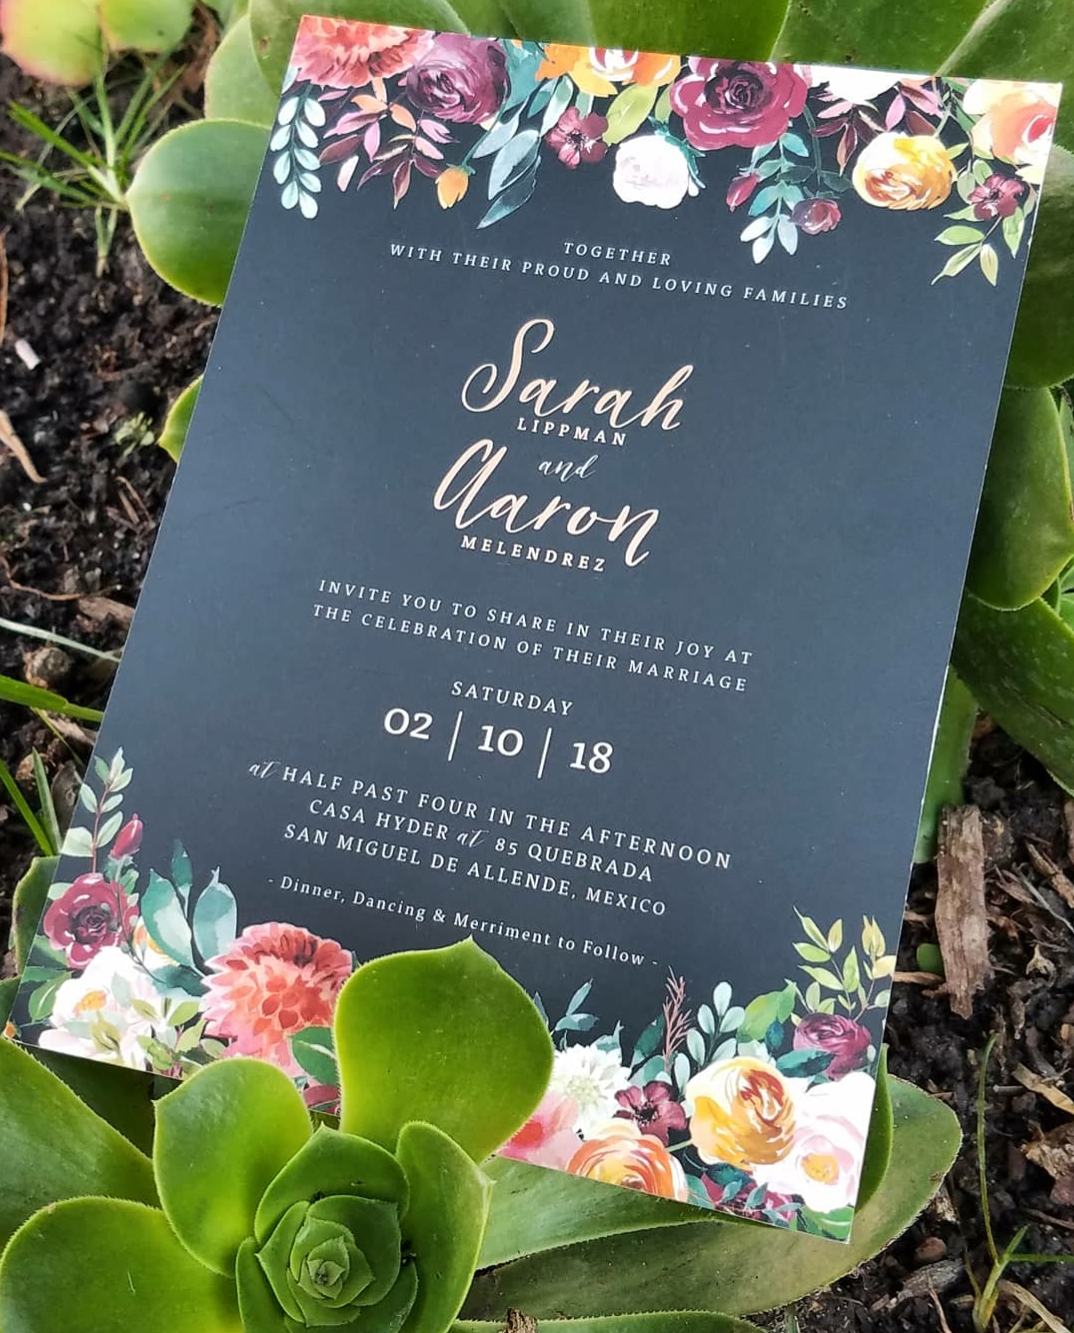 Design of the Month March 2018 Invitation